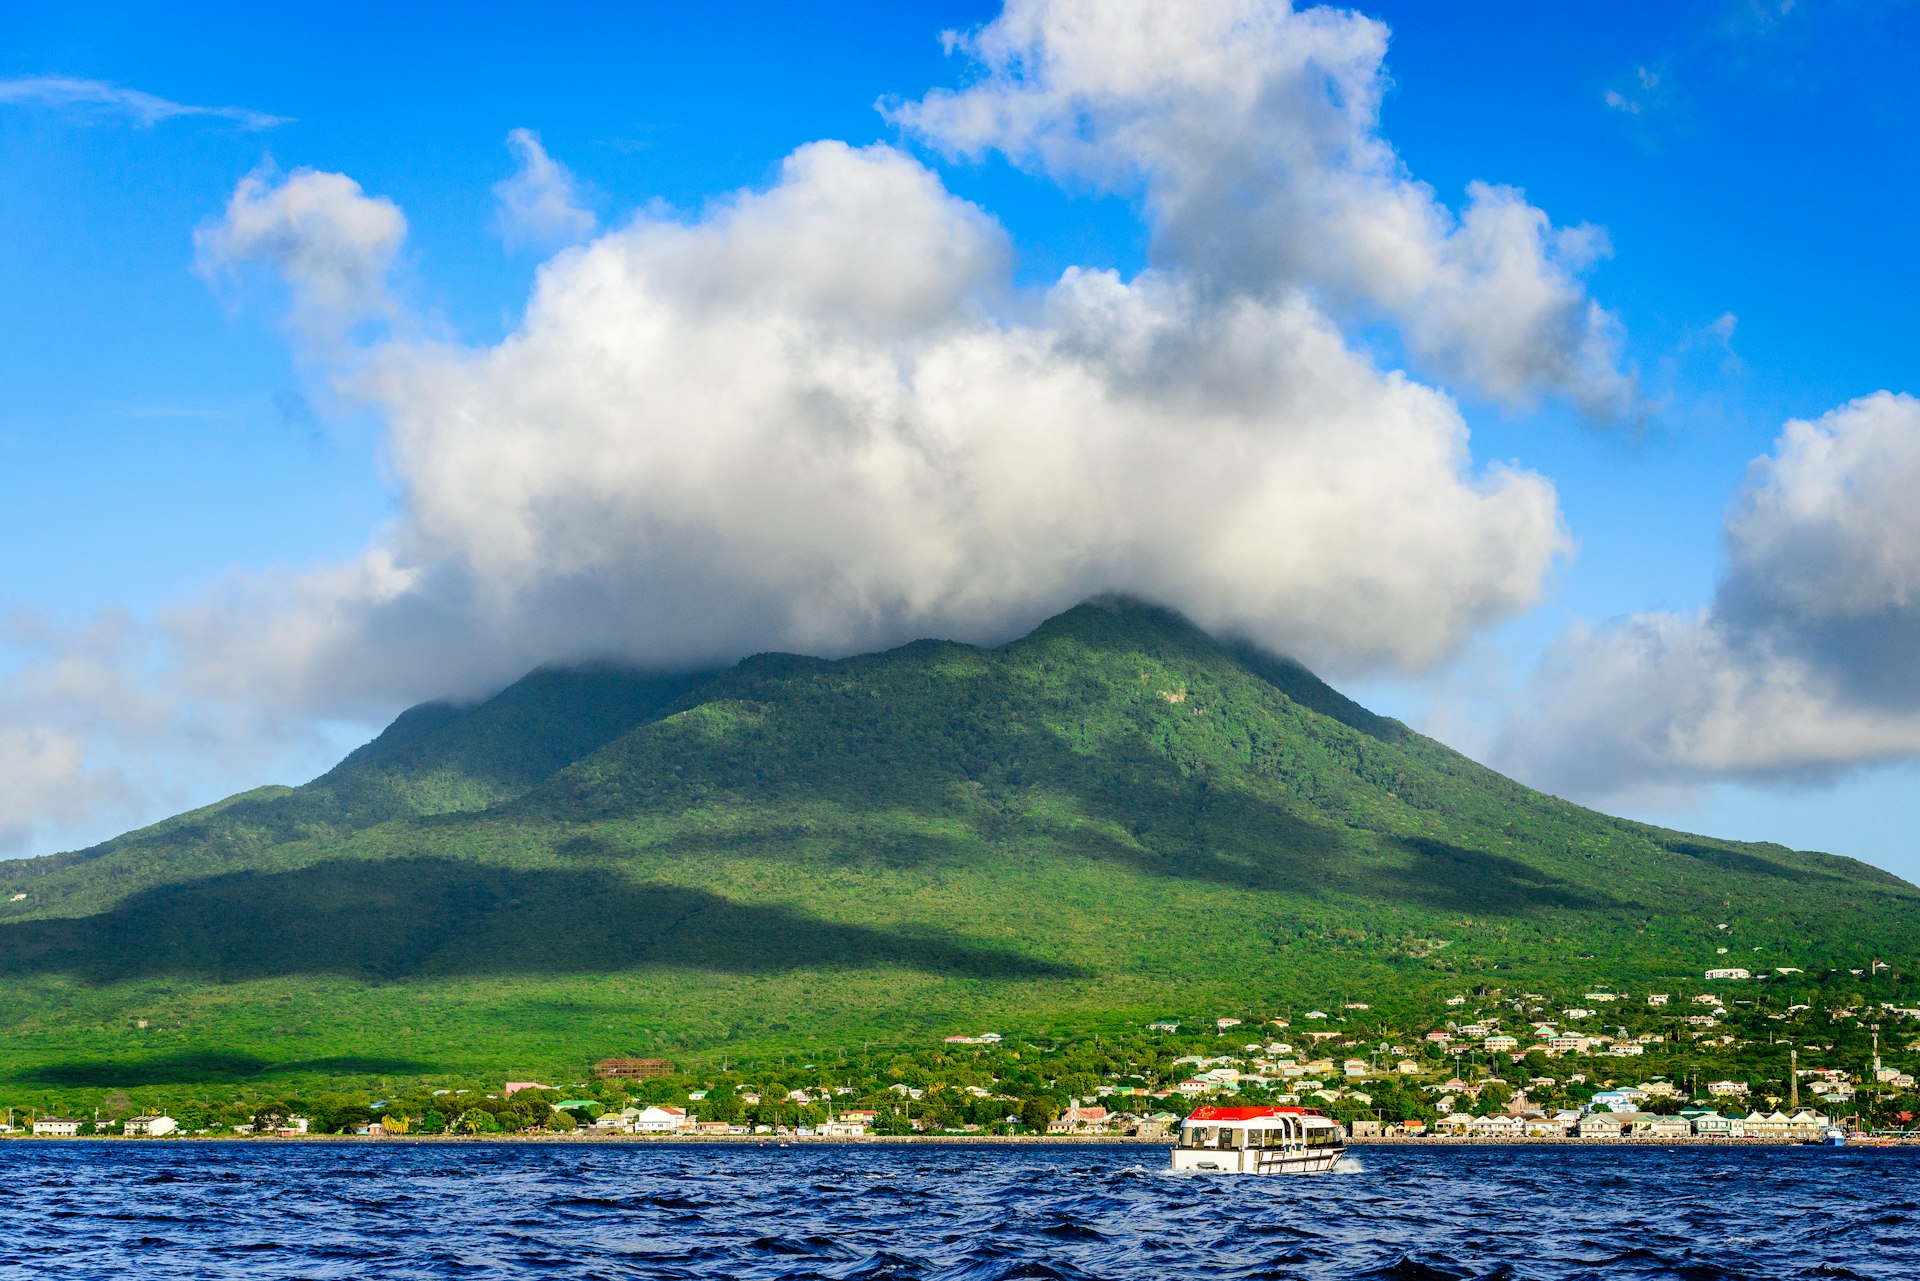 Nevis Peak topped with clouds, as viewed from the water